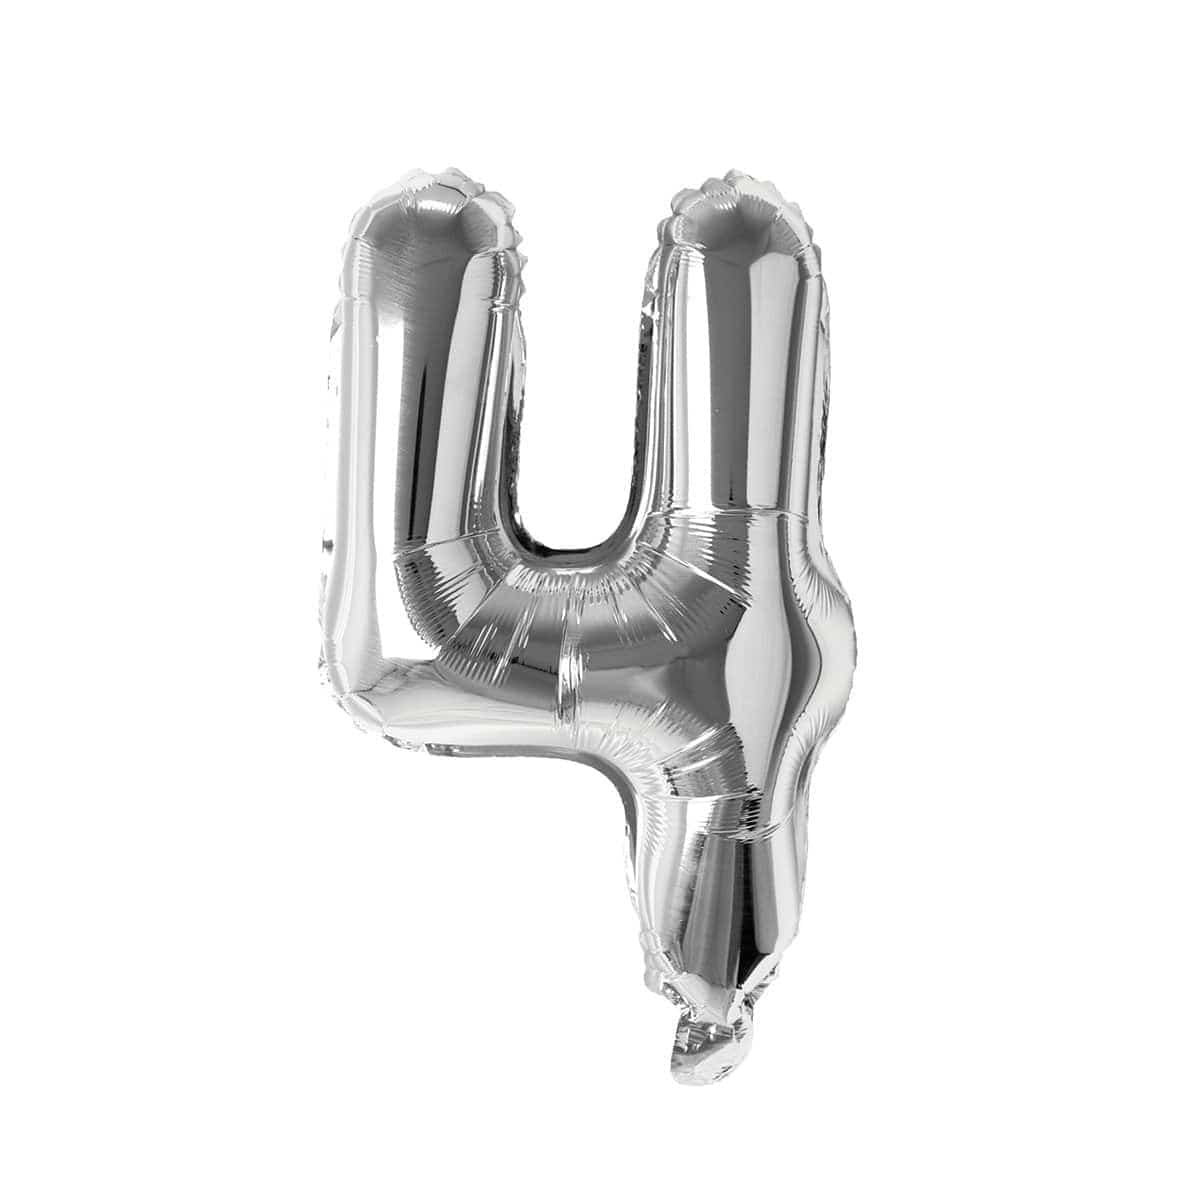 Buy Balloons Silver Number 4 Foil Balloon, 16 Inches sold at Party Expert